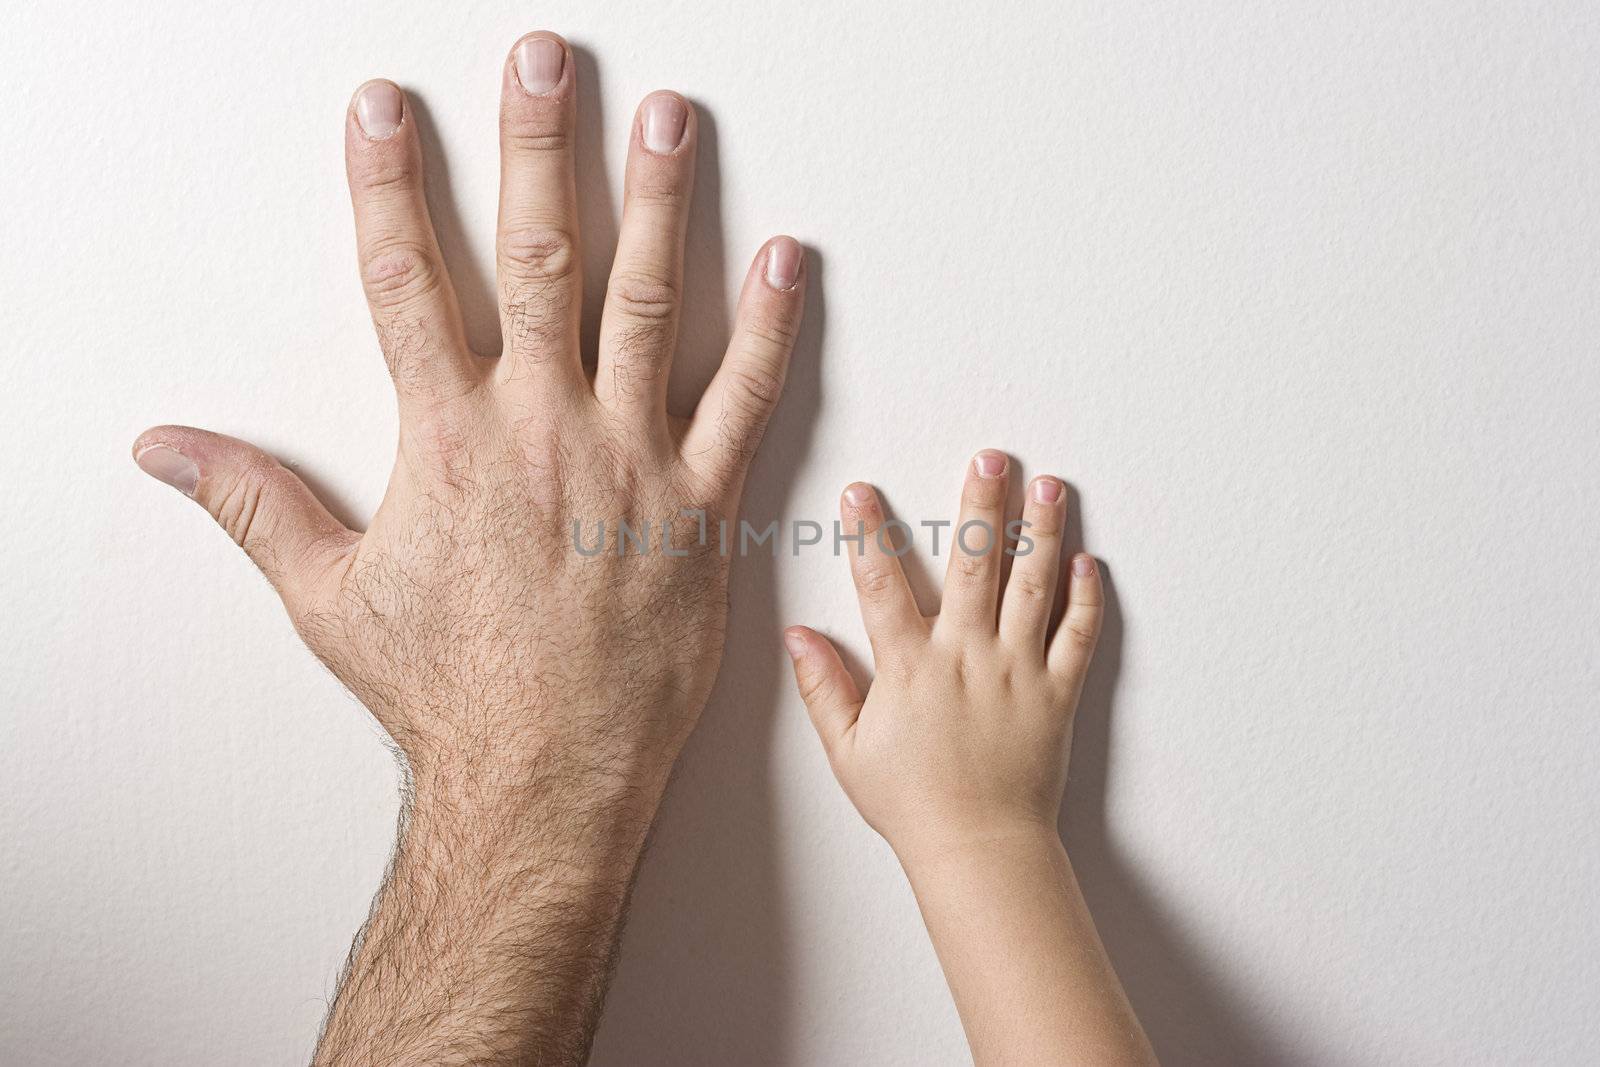 father and son hands by mypstudio